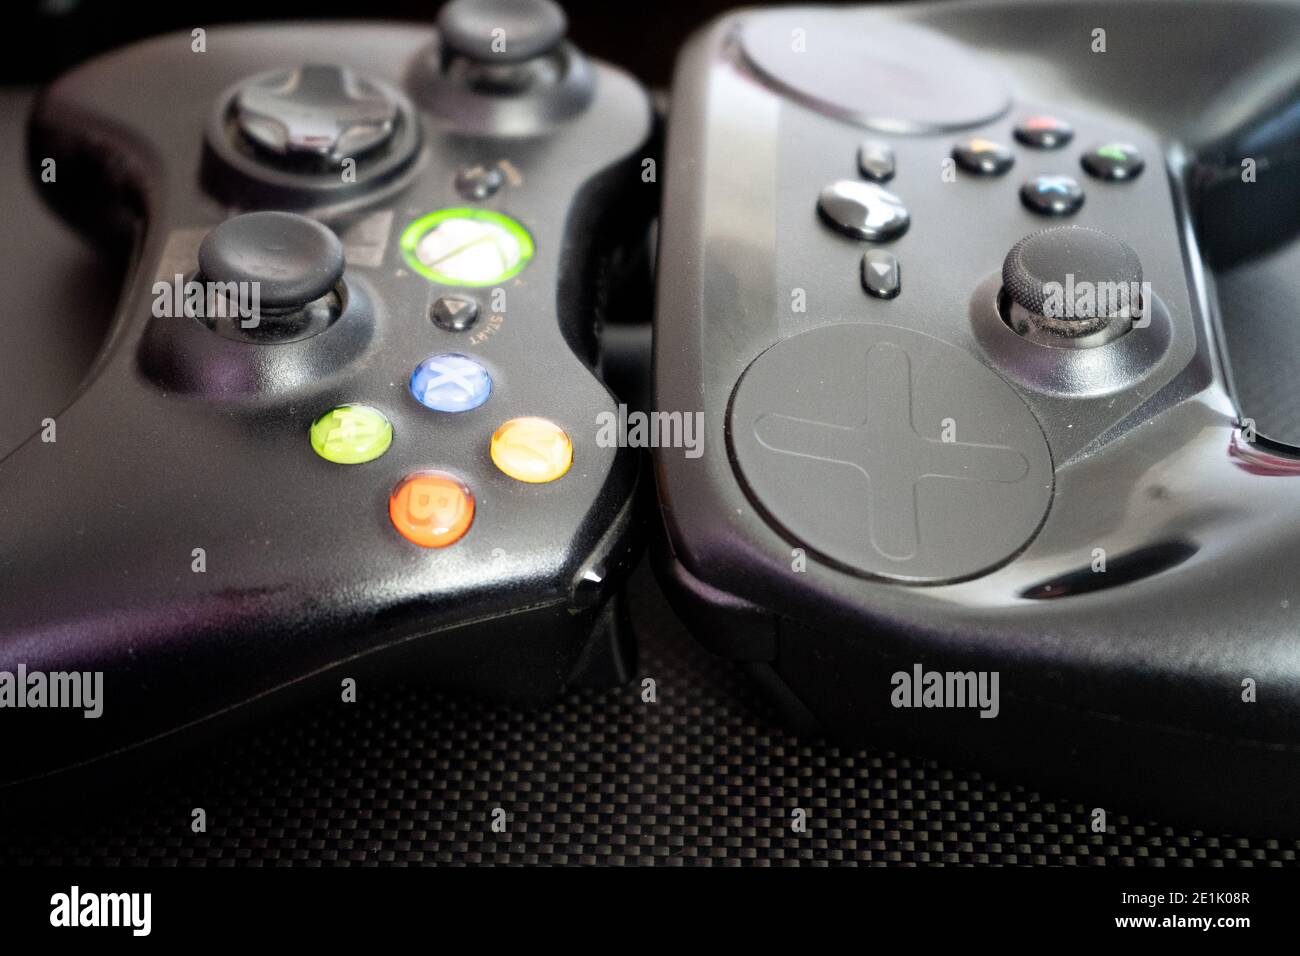 Xbox vs the steam controller on a carbon fiber background showing  technology of inputs for computer gaming Stock Photo - Alamy